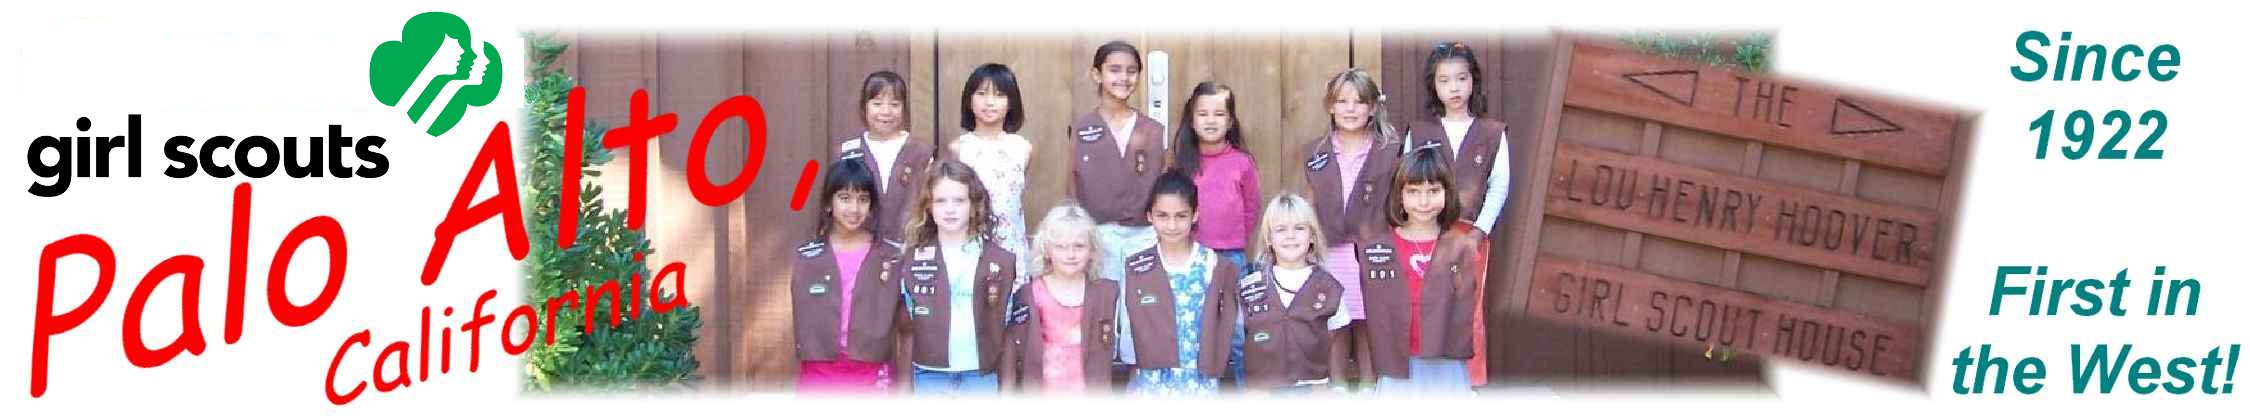 Girl Scouts of Palo Alto Home Page Banner